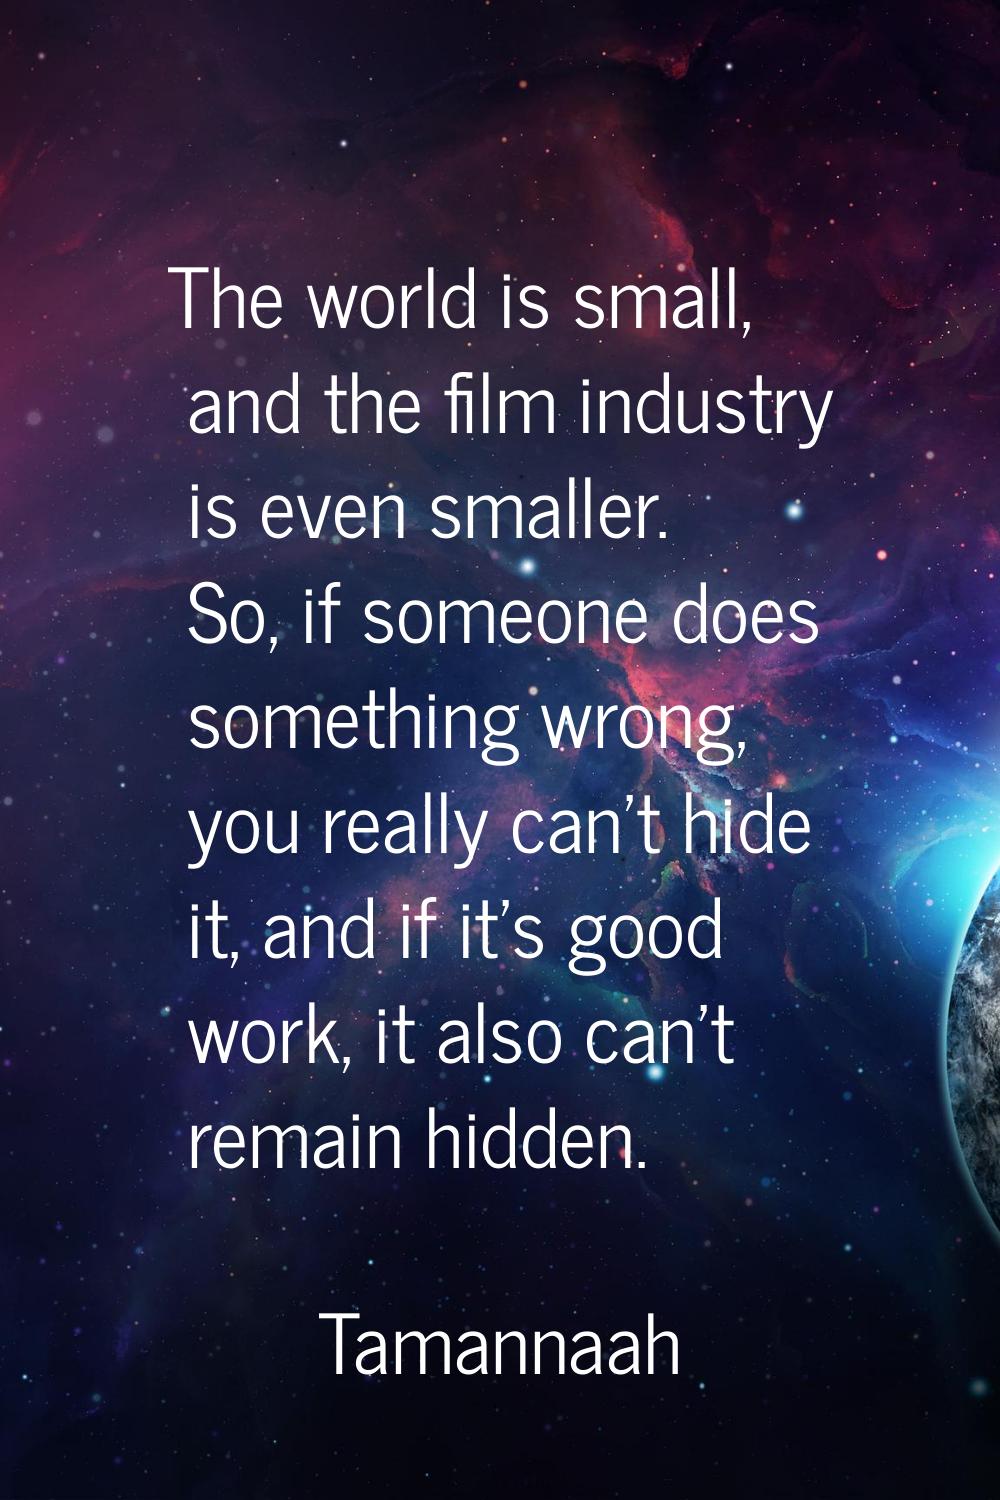 The world is small, and the film industry is even smaller. So, if someone does something wrong, you